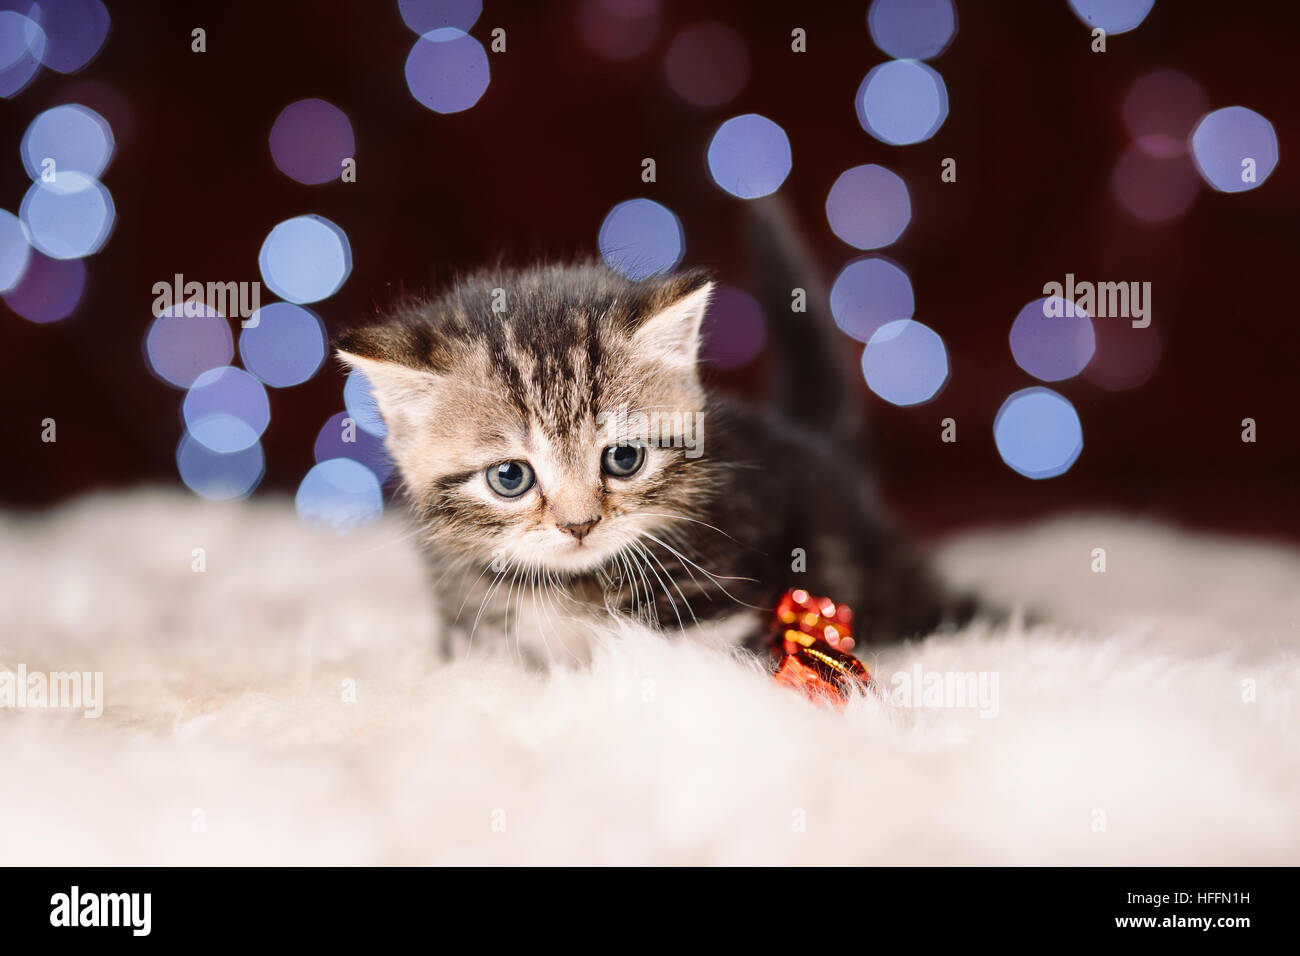 Curious scottish grey kitten sitting on the white fur with the blurry shiny background of Christmas lights, New Year concept, copy space Stock Photo